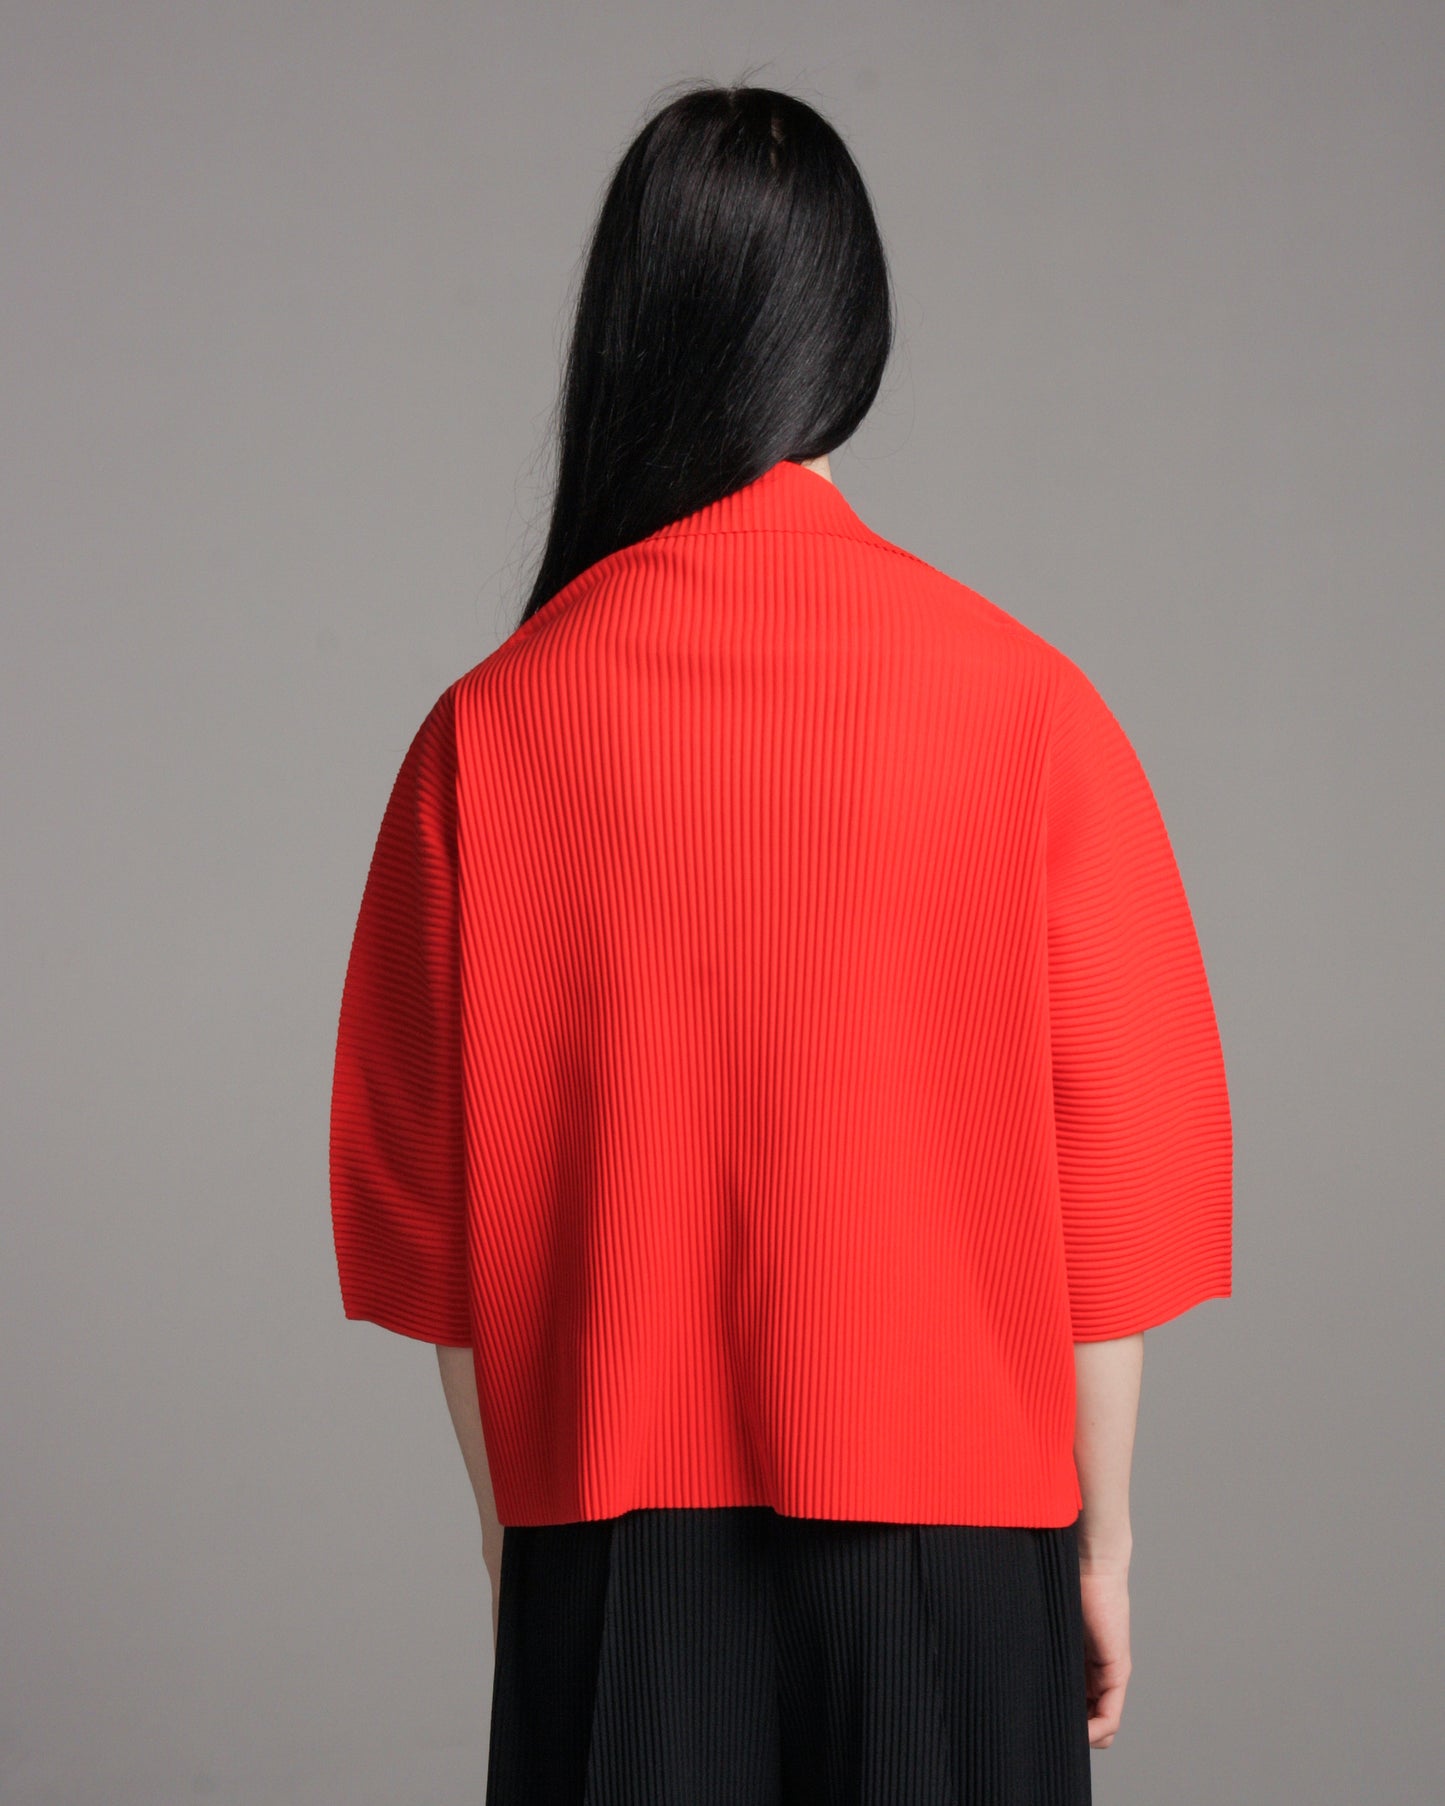 Red Square Pleats Top